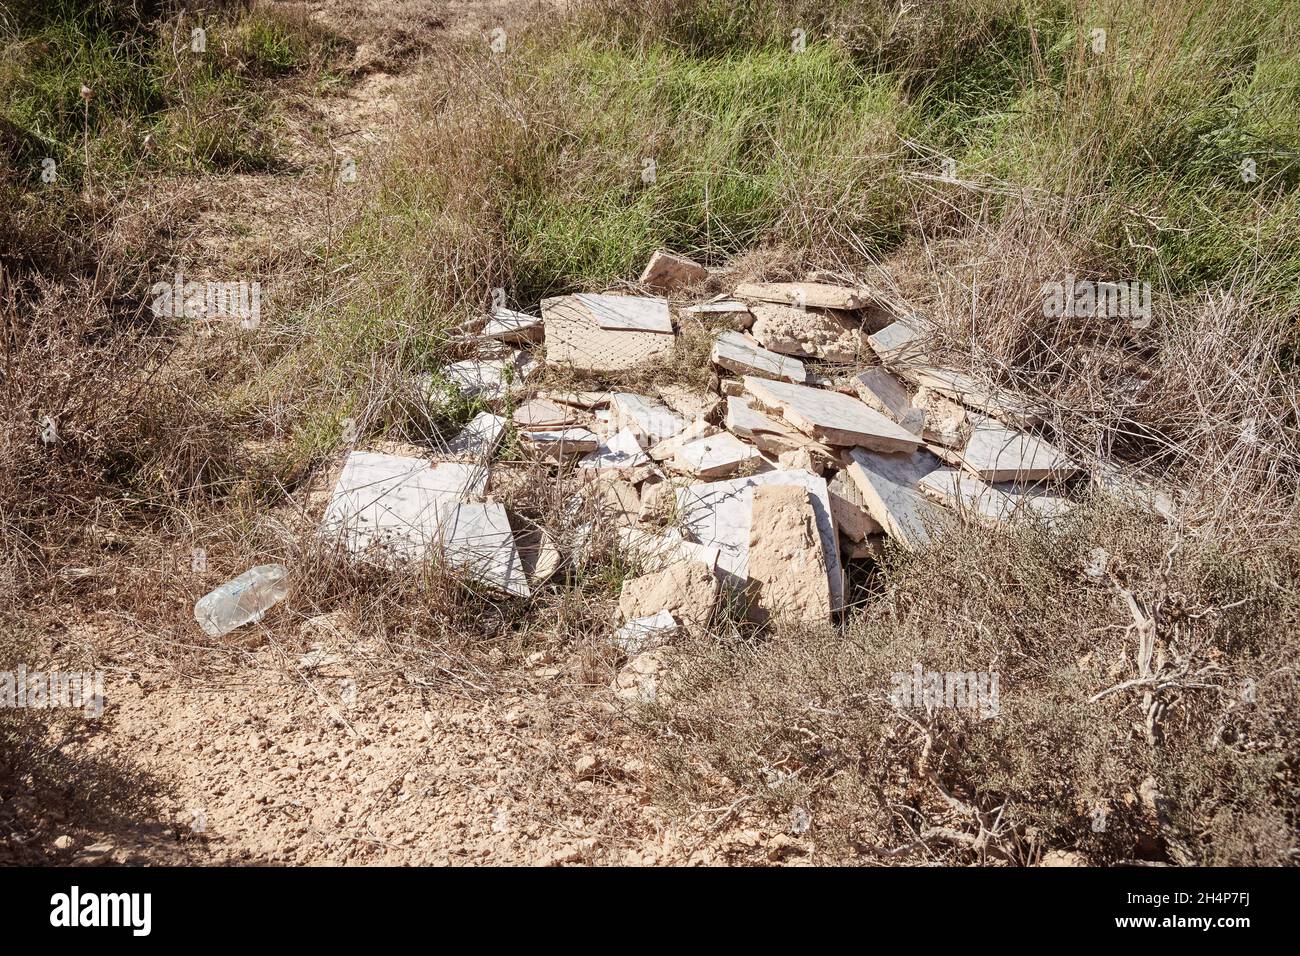 wantonly discarded building materials and a plastic bottle that were dumped illegally pollute a nature reserve in the Negev Highlands desert in Israel Stock Photo